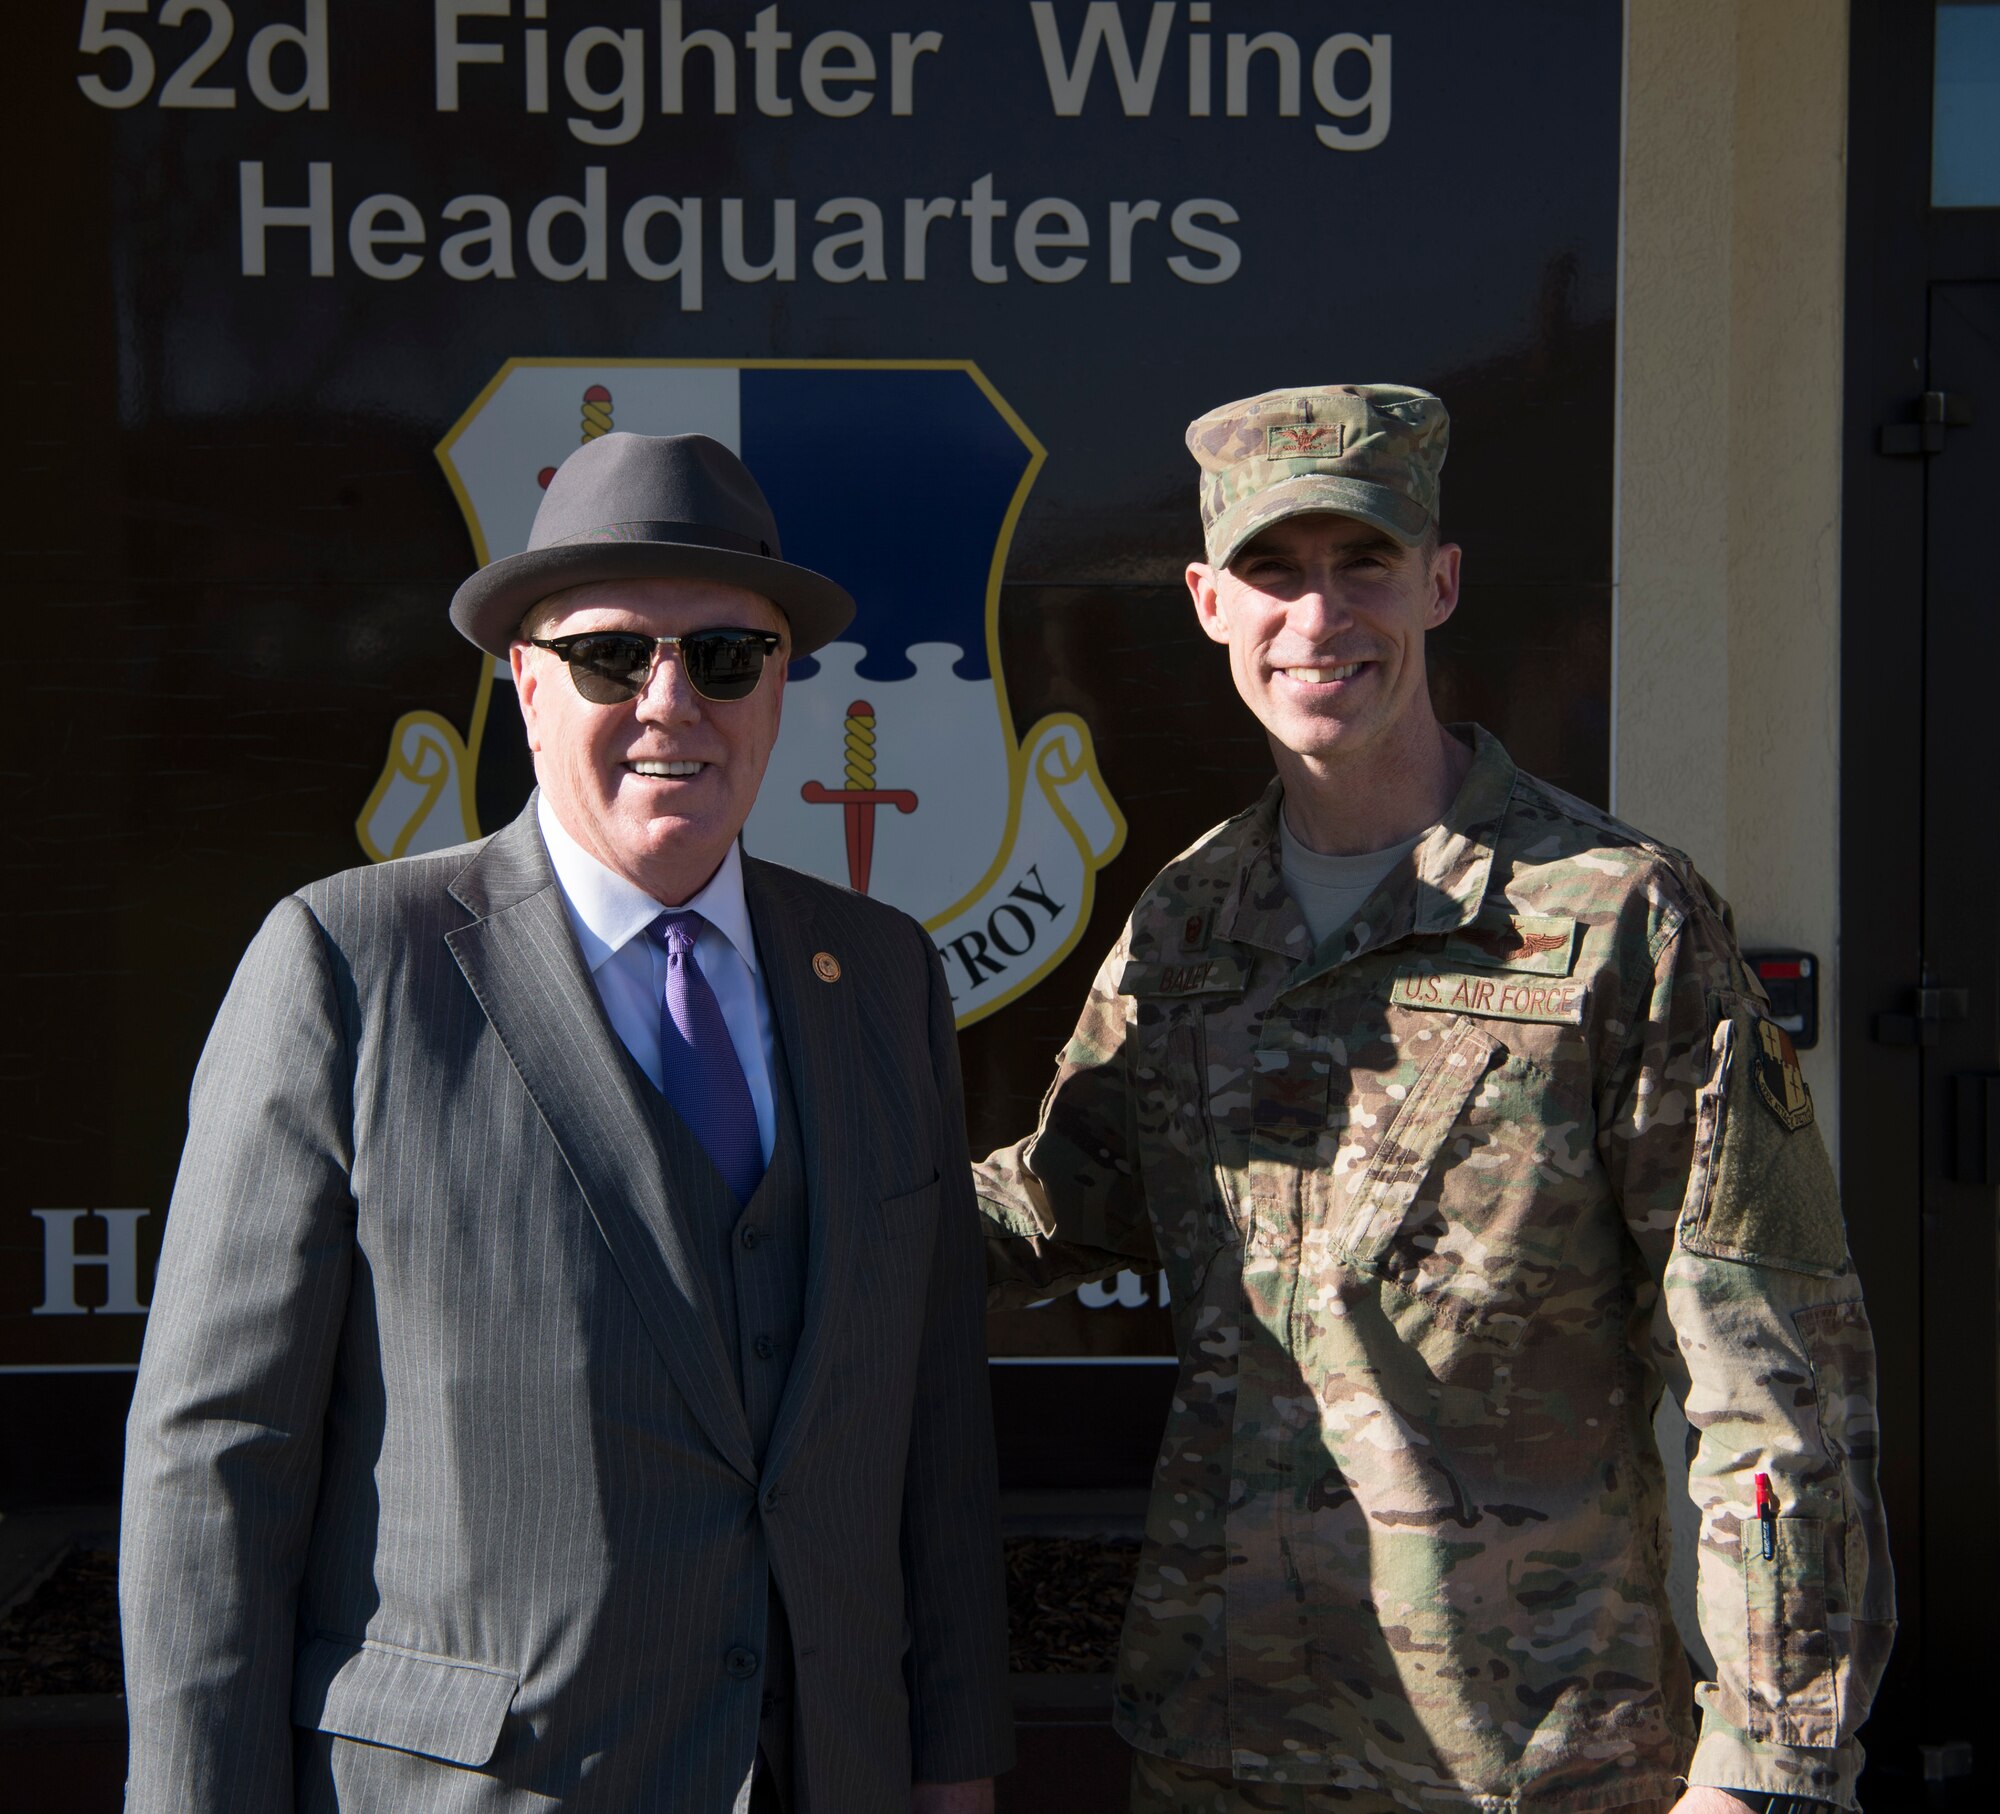 Evans visited Spangdahlem AB to meet with base leadership and express his gratitude to the Spangdahlem AB honor guard for their services.